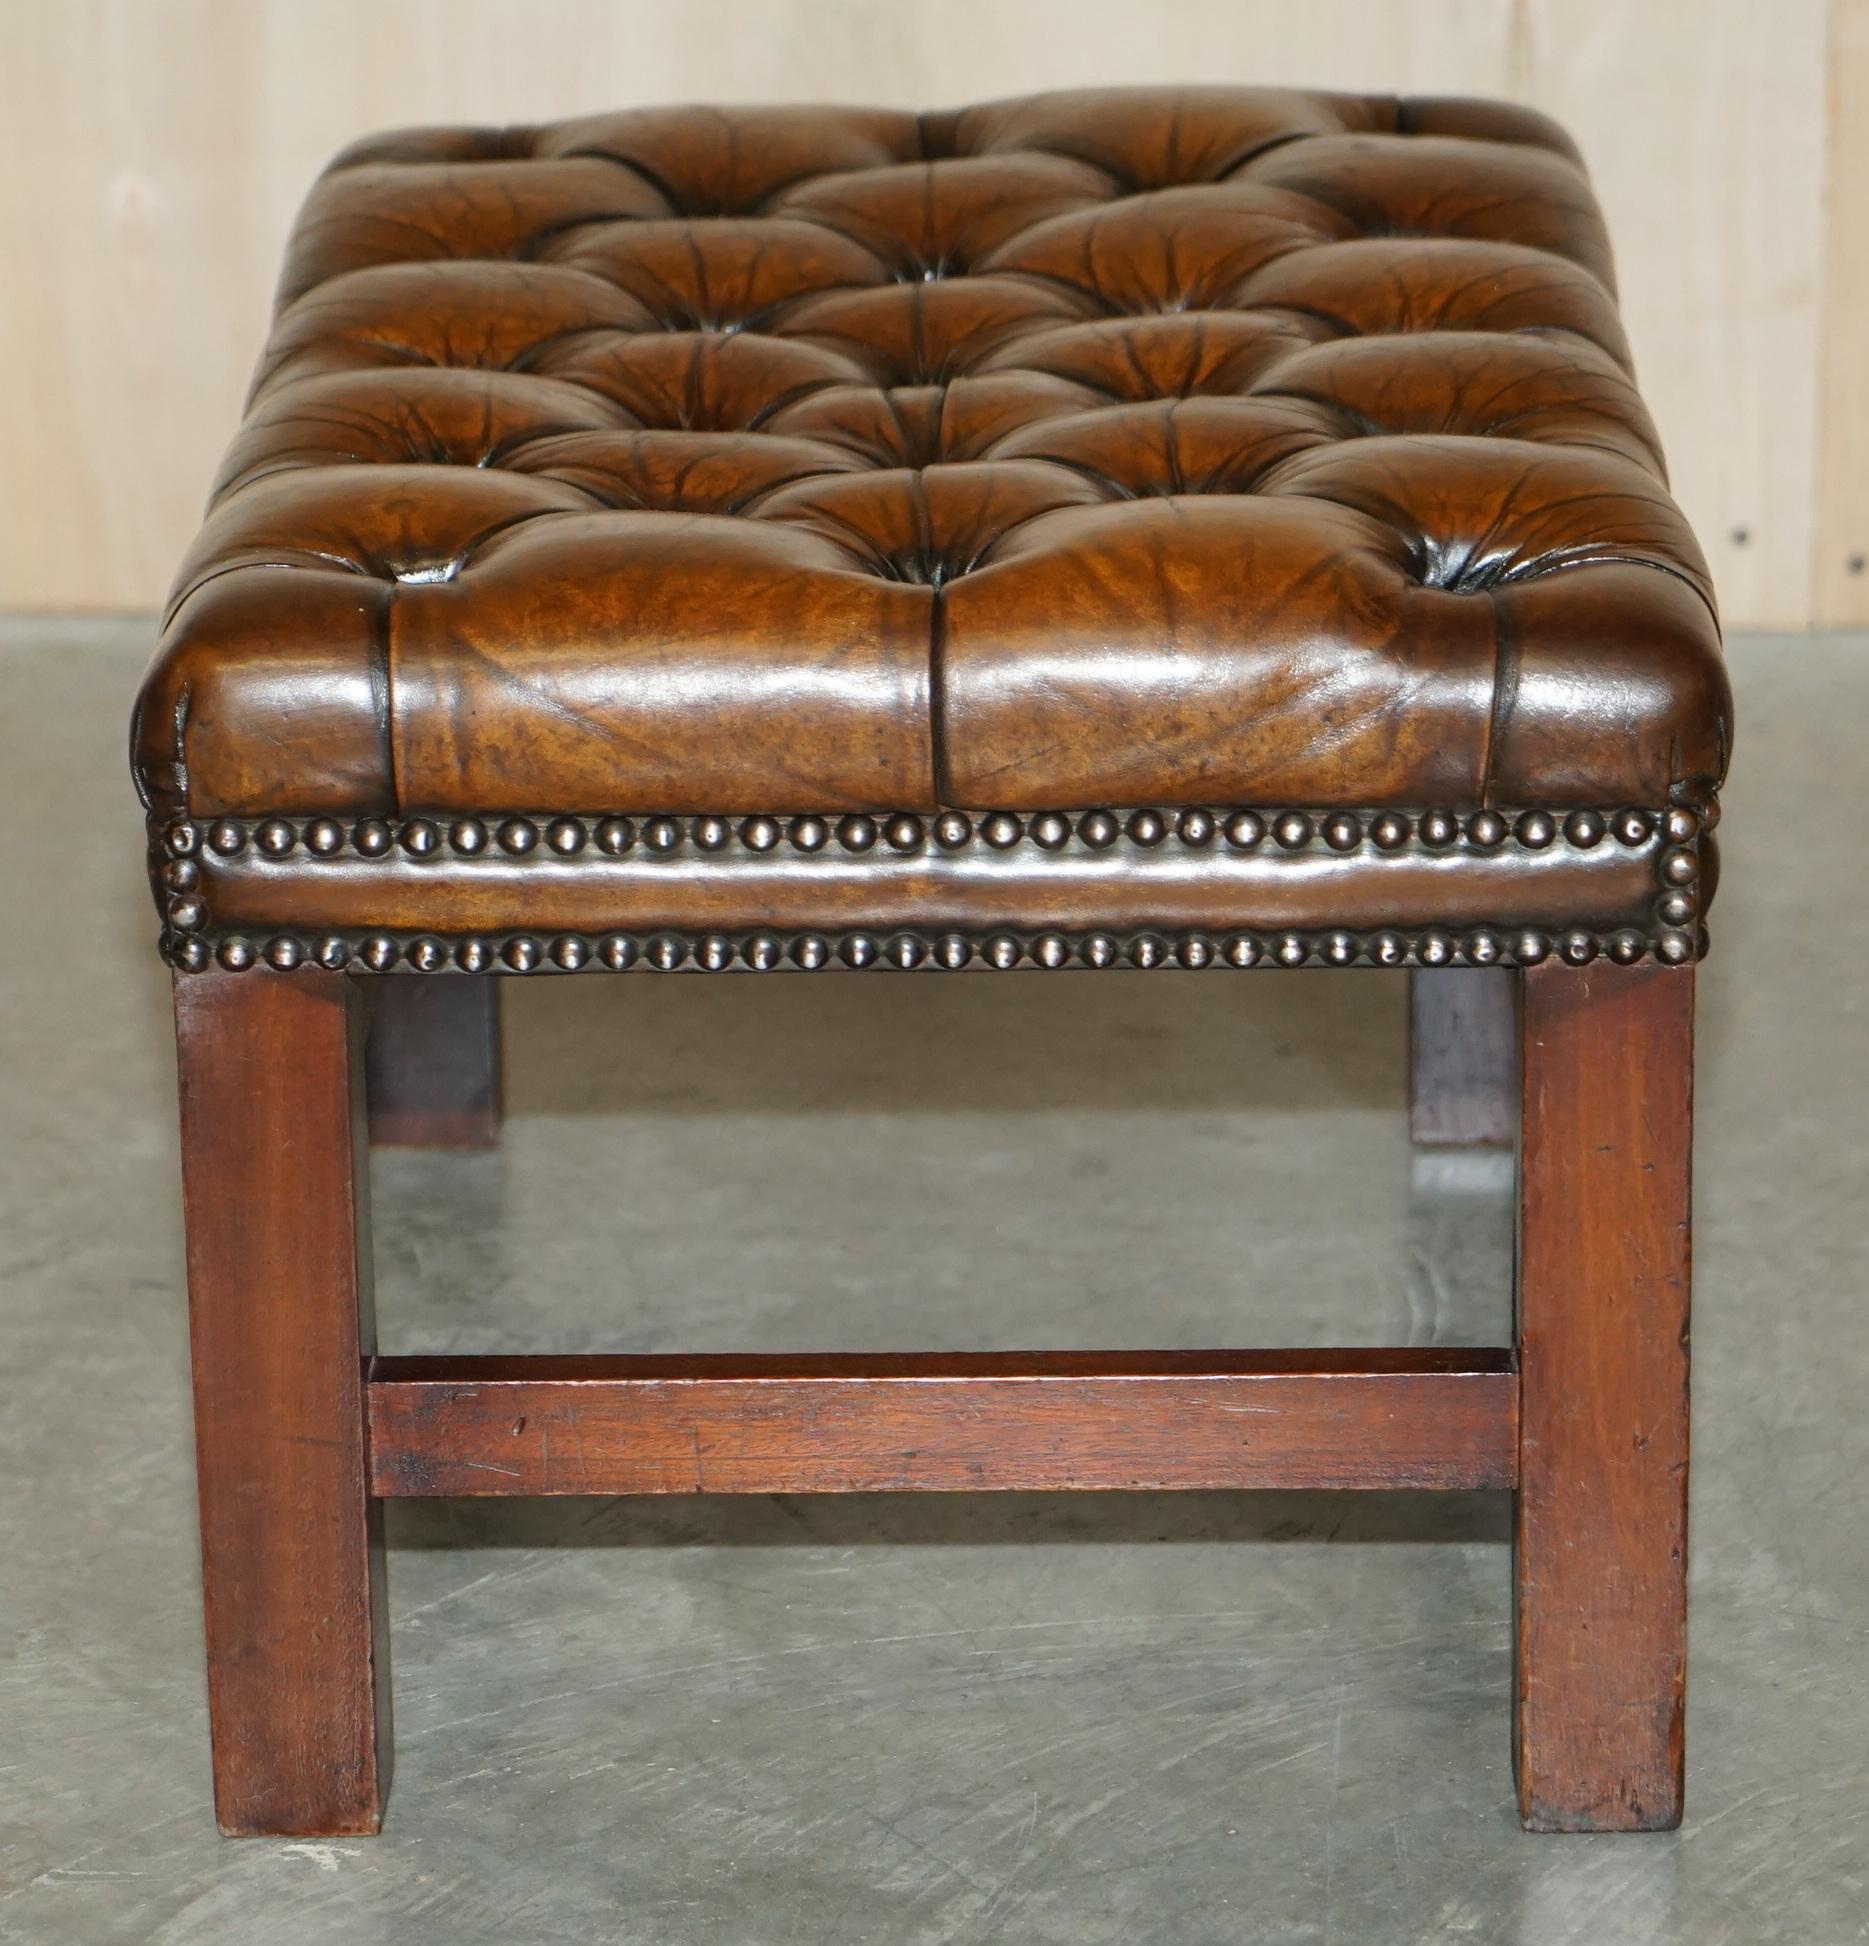 English Vintage Fully Restored Chesterfield Hand Dyed Brown Leather Tufted Footstool For Sale